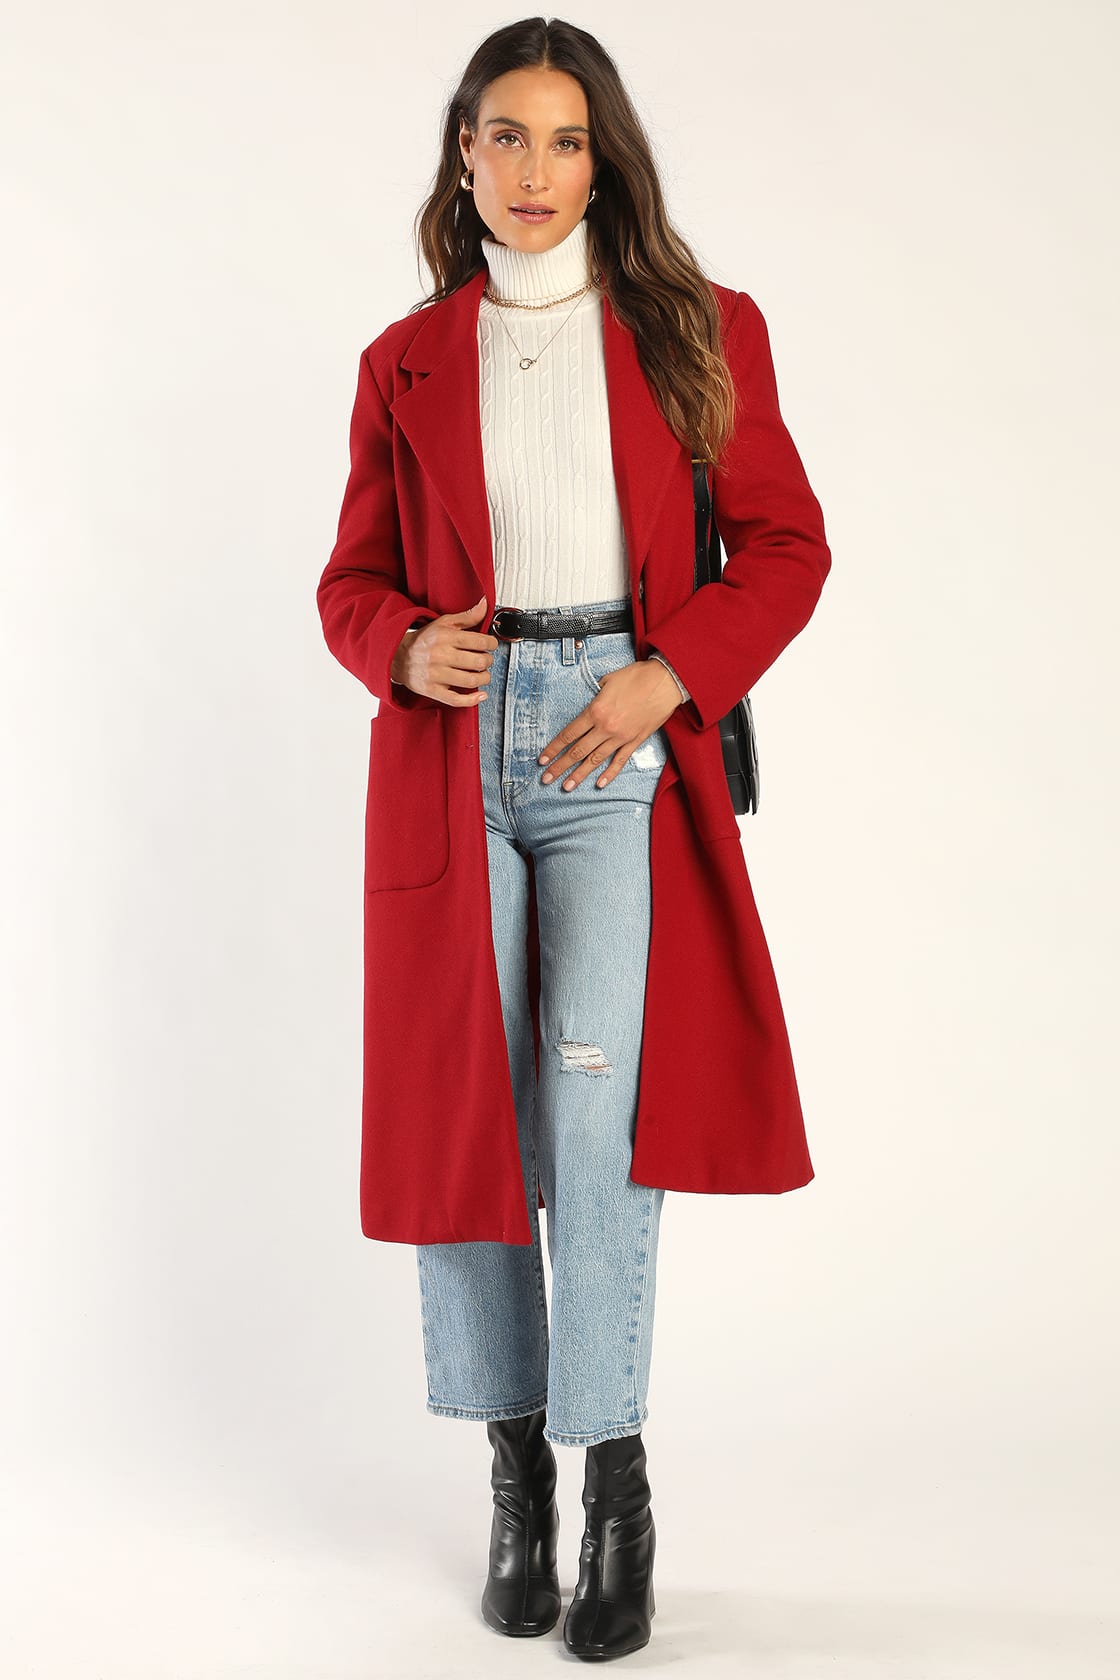 Abercrombie Red Bodysuit with black jeans, strappy black heels, and a red pea coat